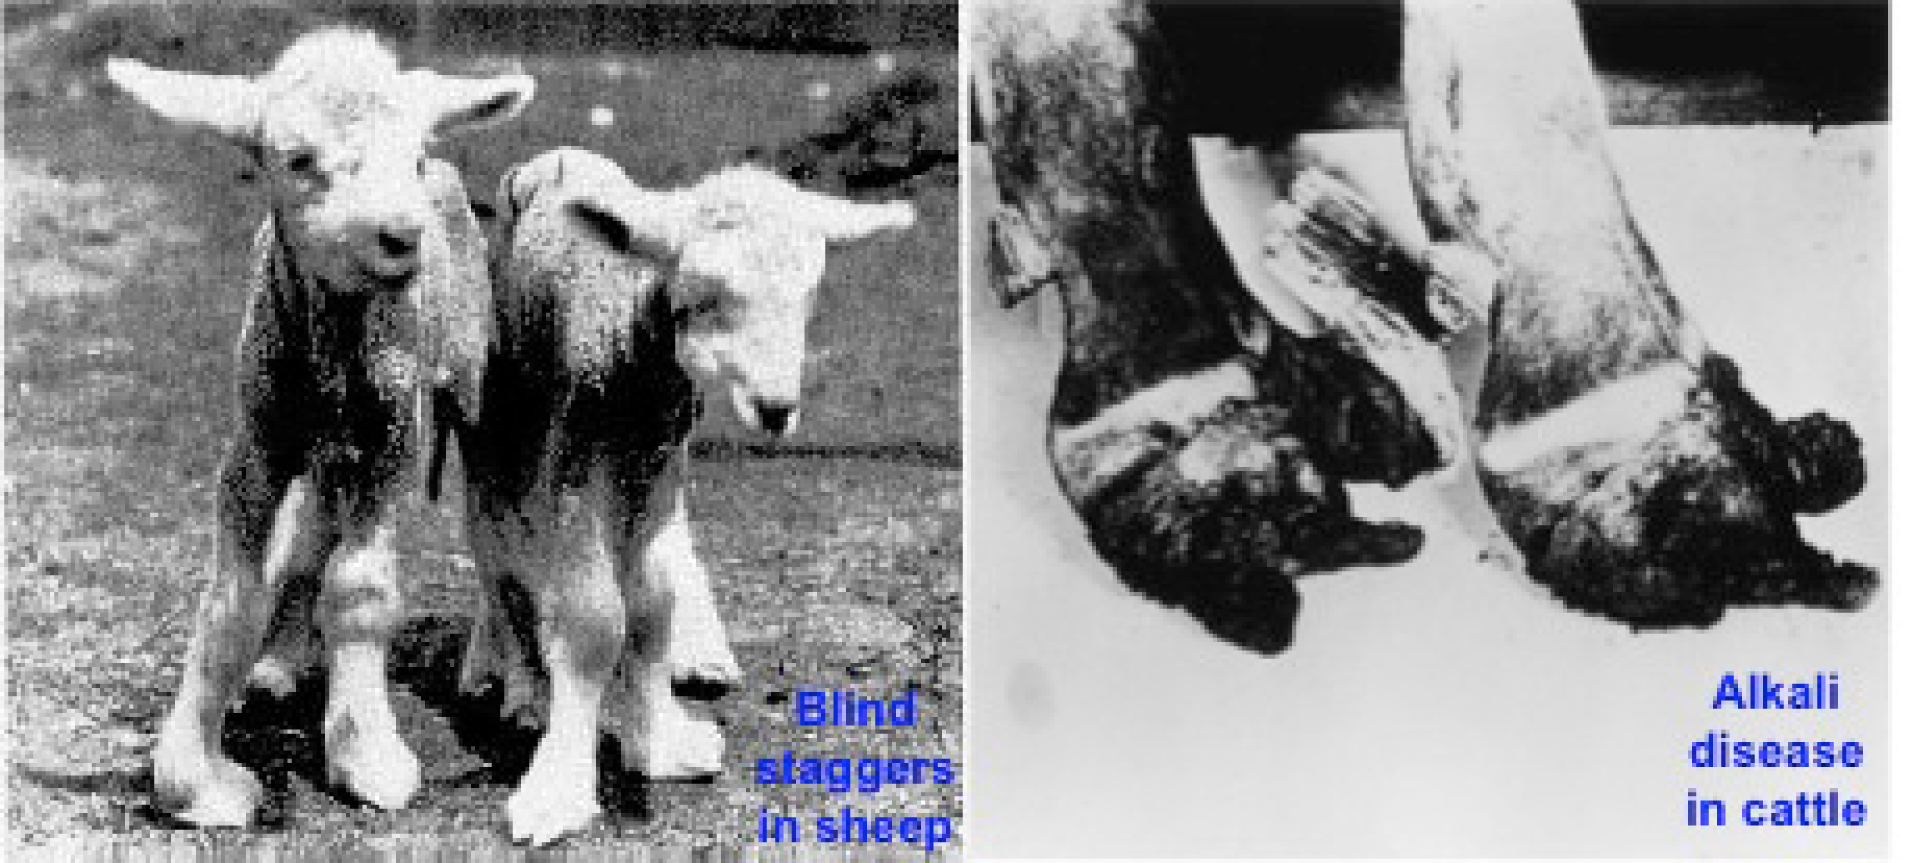 Blind staggers in sheep caused by acute selenium toxicity (left) and Alkali disease in cattle (right) caused by chronic Se toxicity.Note the severely damaged hoofs resulting from Se excess.